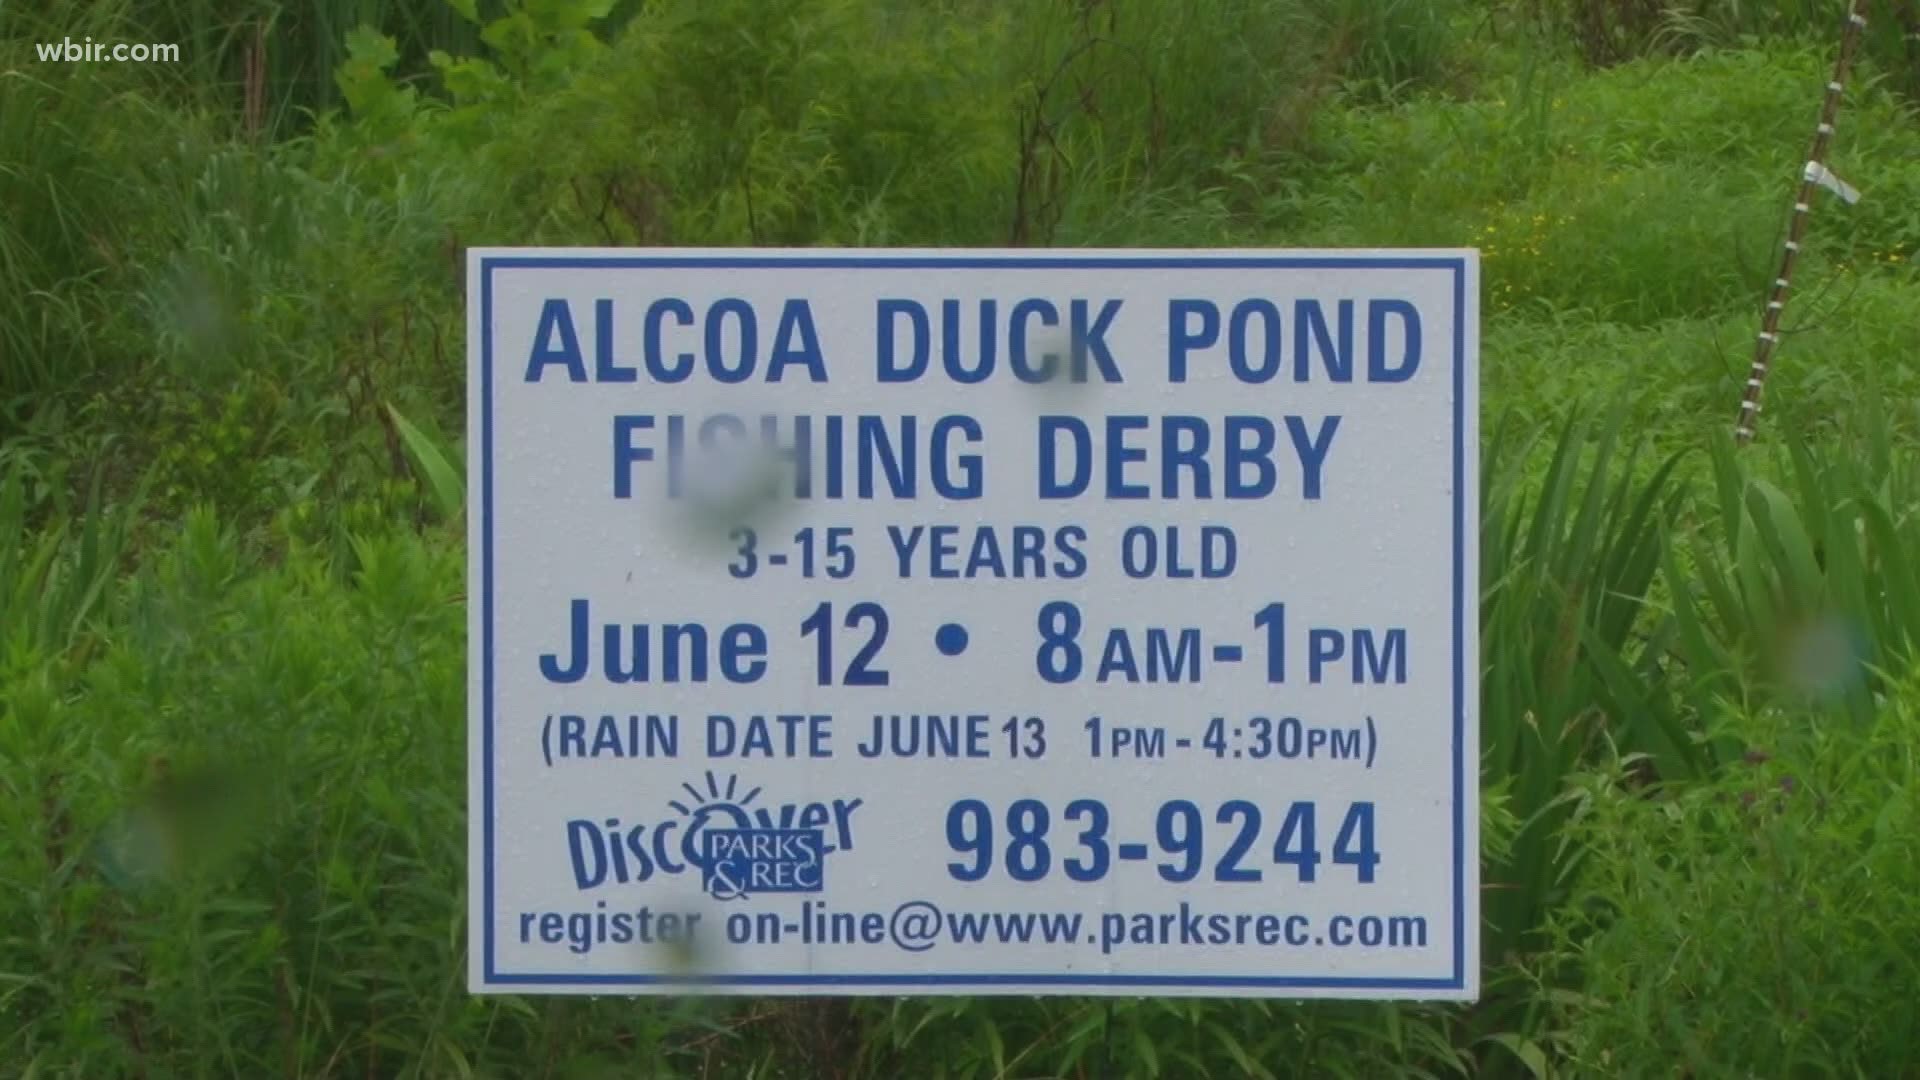 Alcoa Duck Pond to host Free Fishing Day event on Saturday